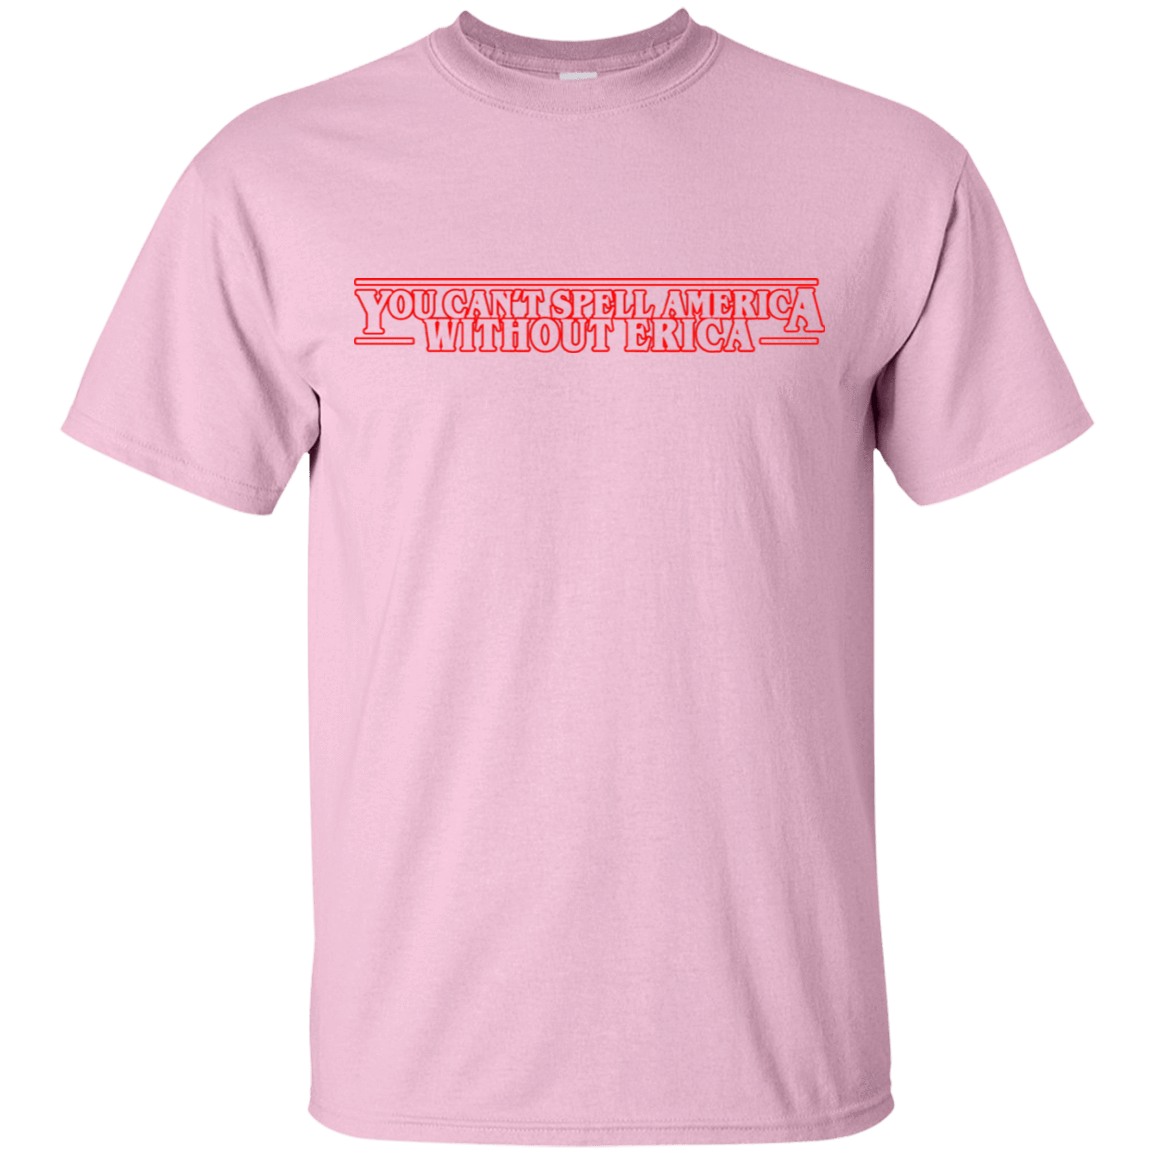 T-Shirts Light Pink / S You Cant Spell America Without Erica T-Shirt